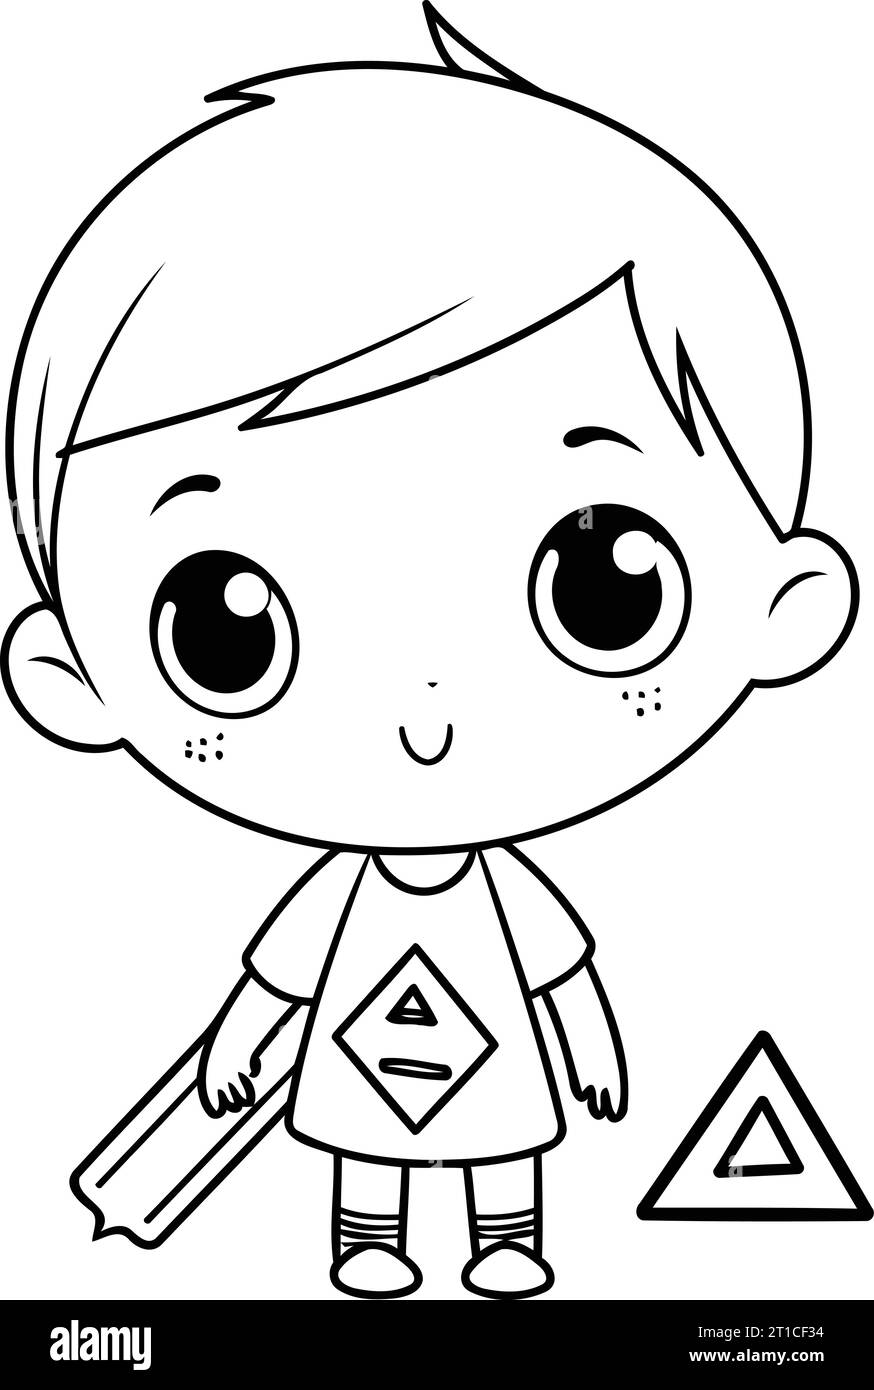 cute little boy with pencil and warning triangle vector illustration graphic design Stock Vector